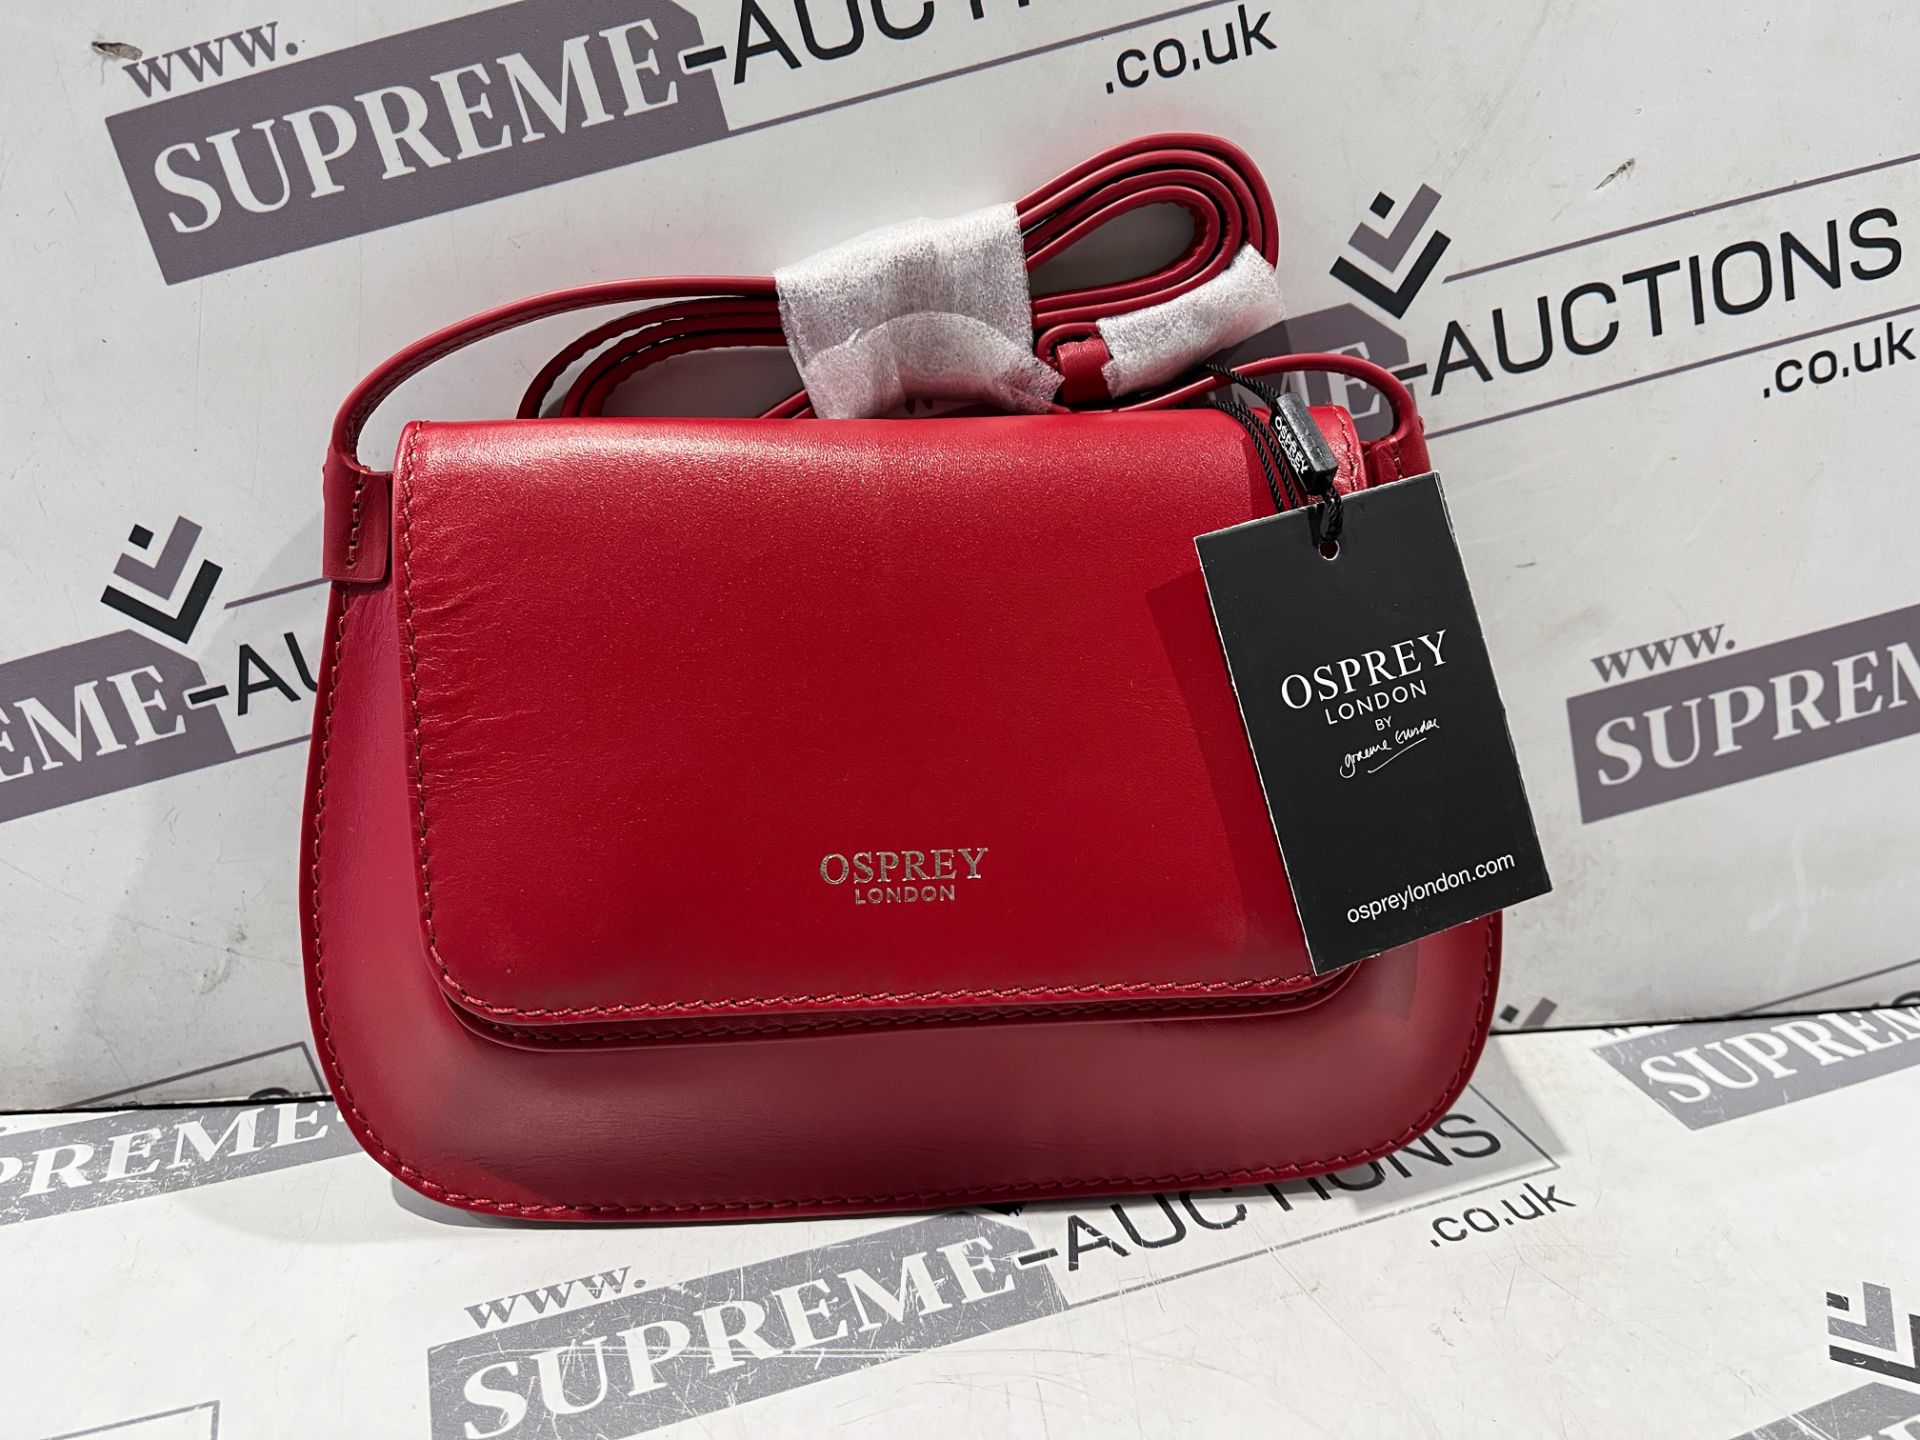 BRAND NEW OSPREY CHERRY THE MEAVE LEATHER CROSSBODY BAG RRP £125 S1-33